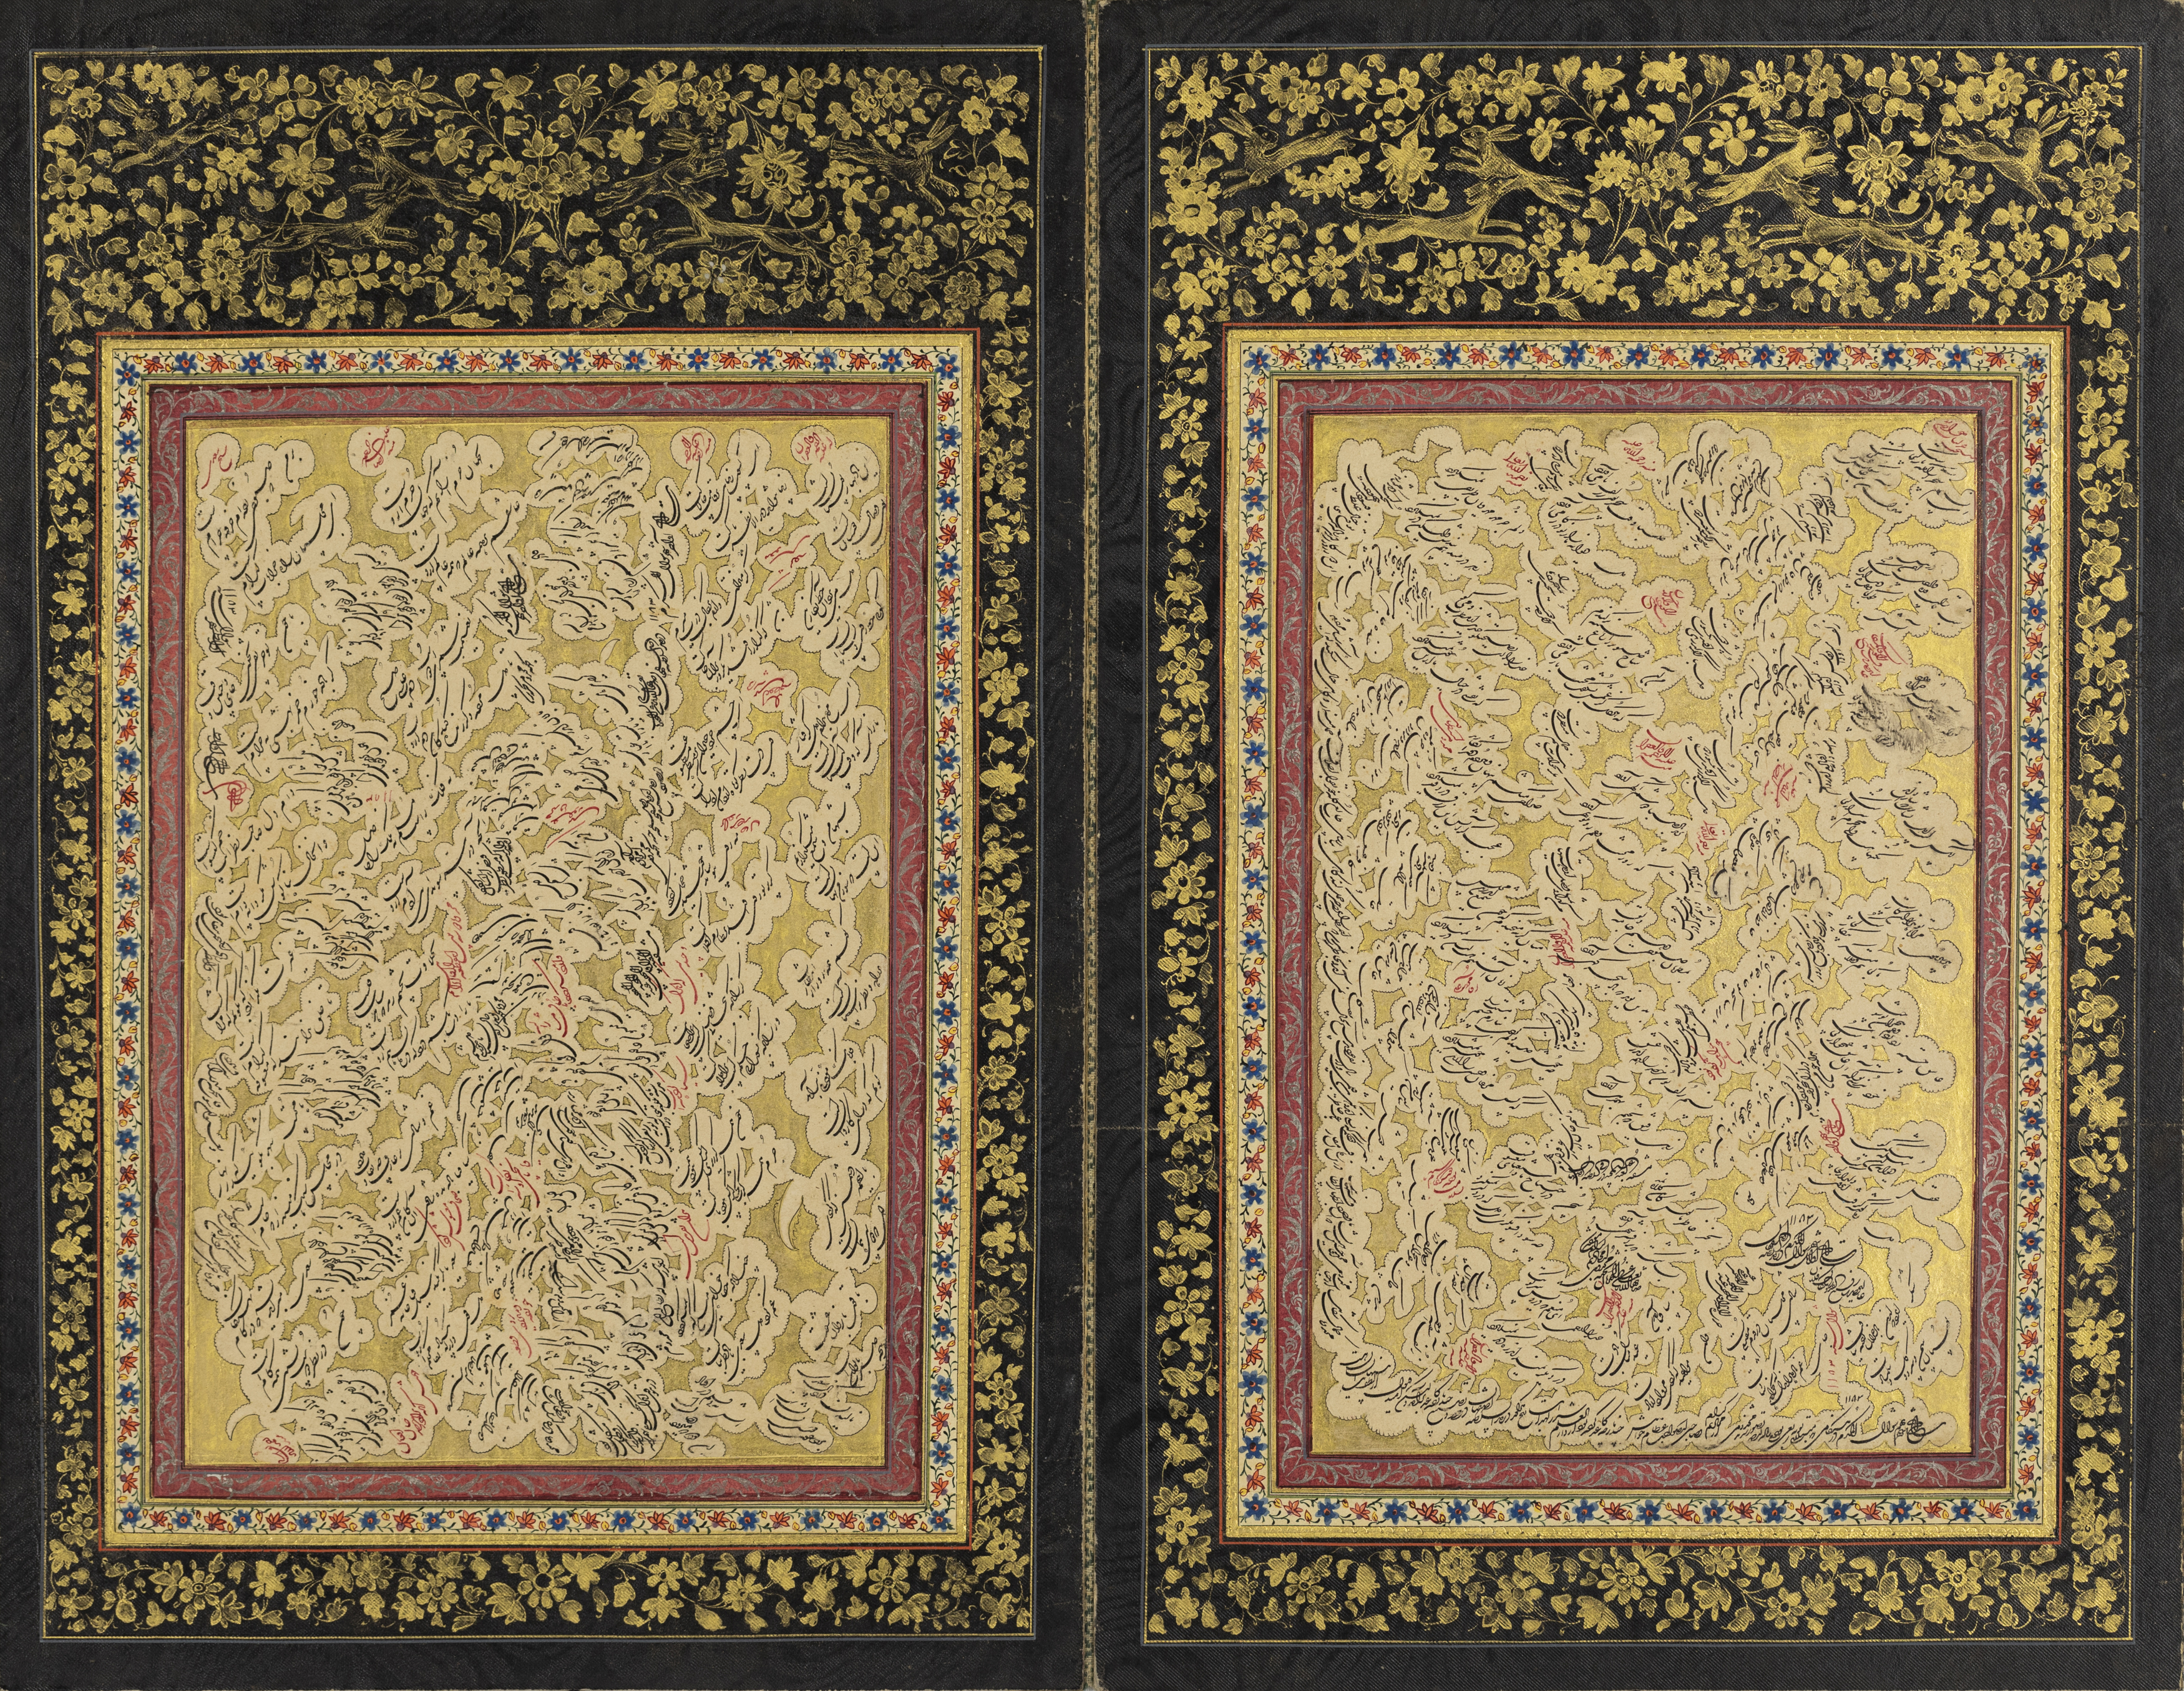 A Zand calligraphic bifolio, Both panels signed and dated 1184AH/1770AD, each in black shikaste... - Image 2 of 2